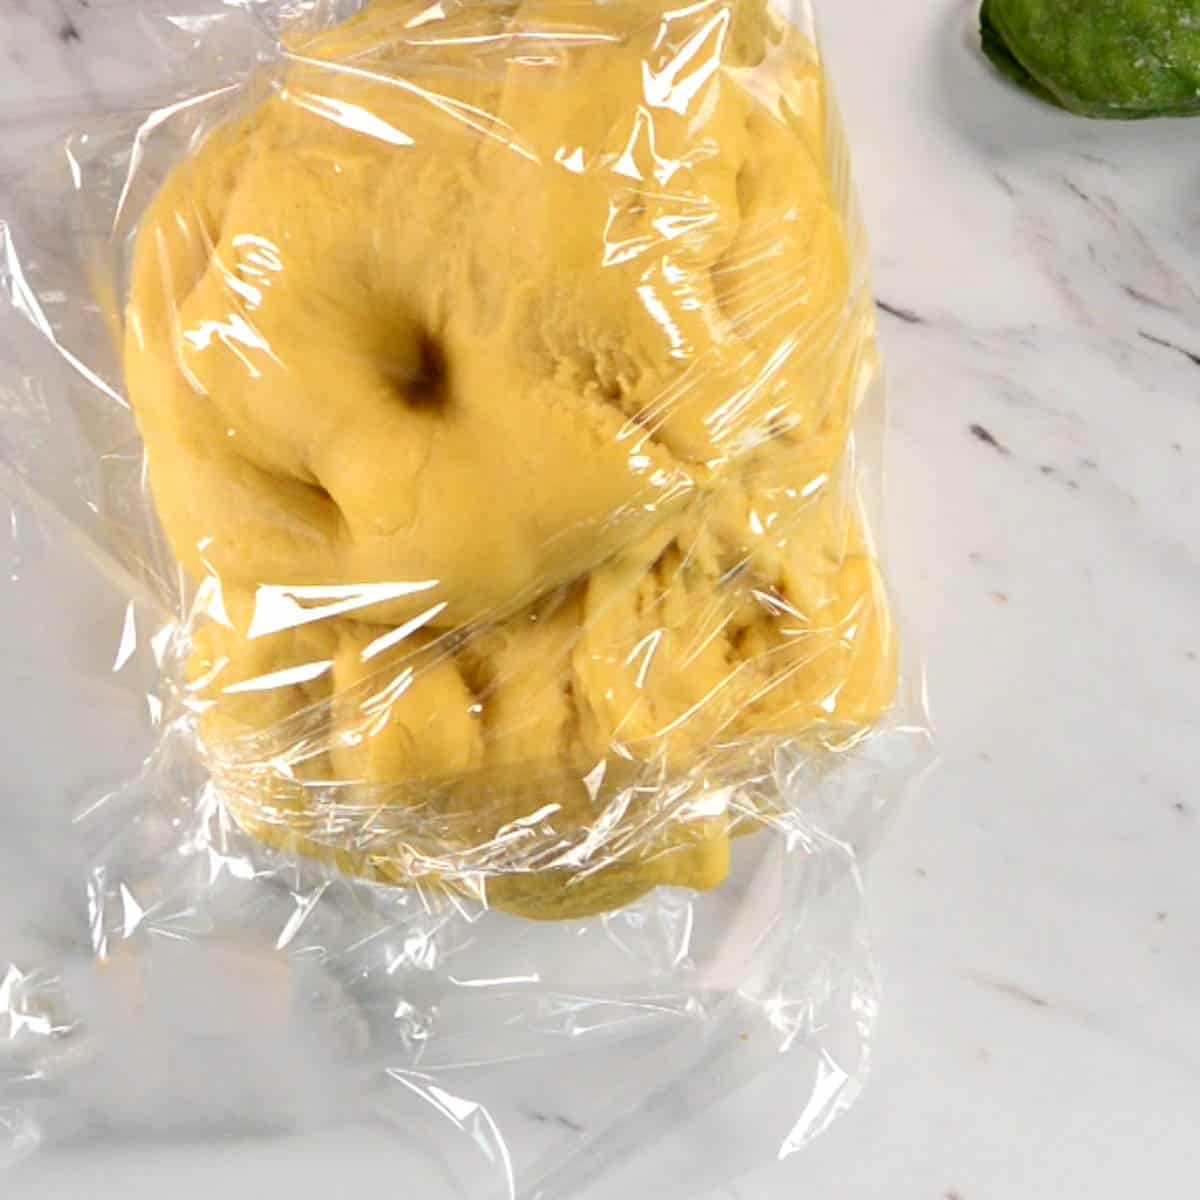 wrapping homemade pasta dough in plastic wrap.